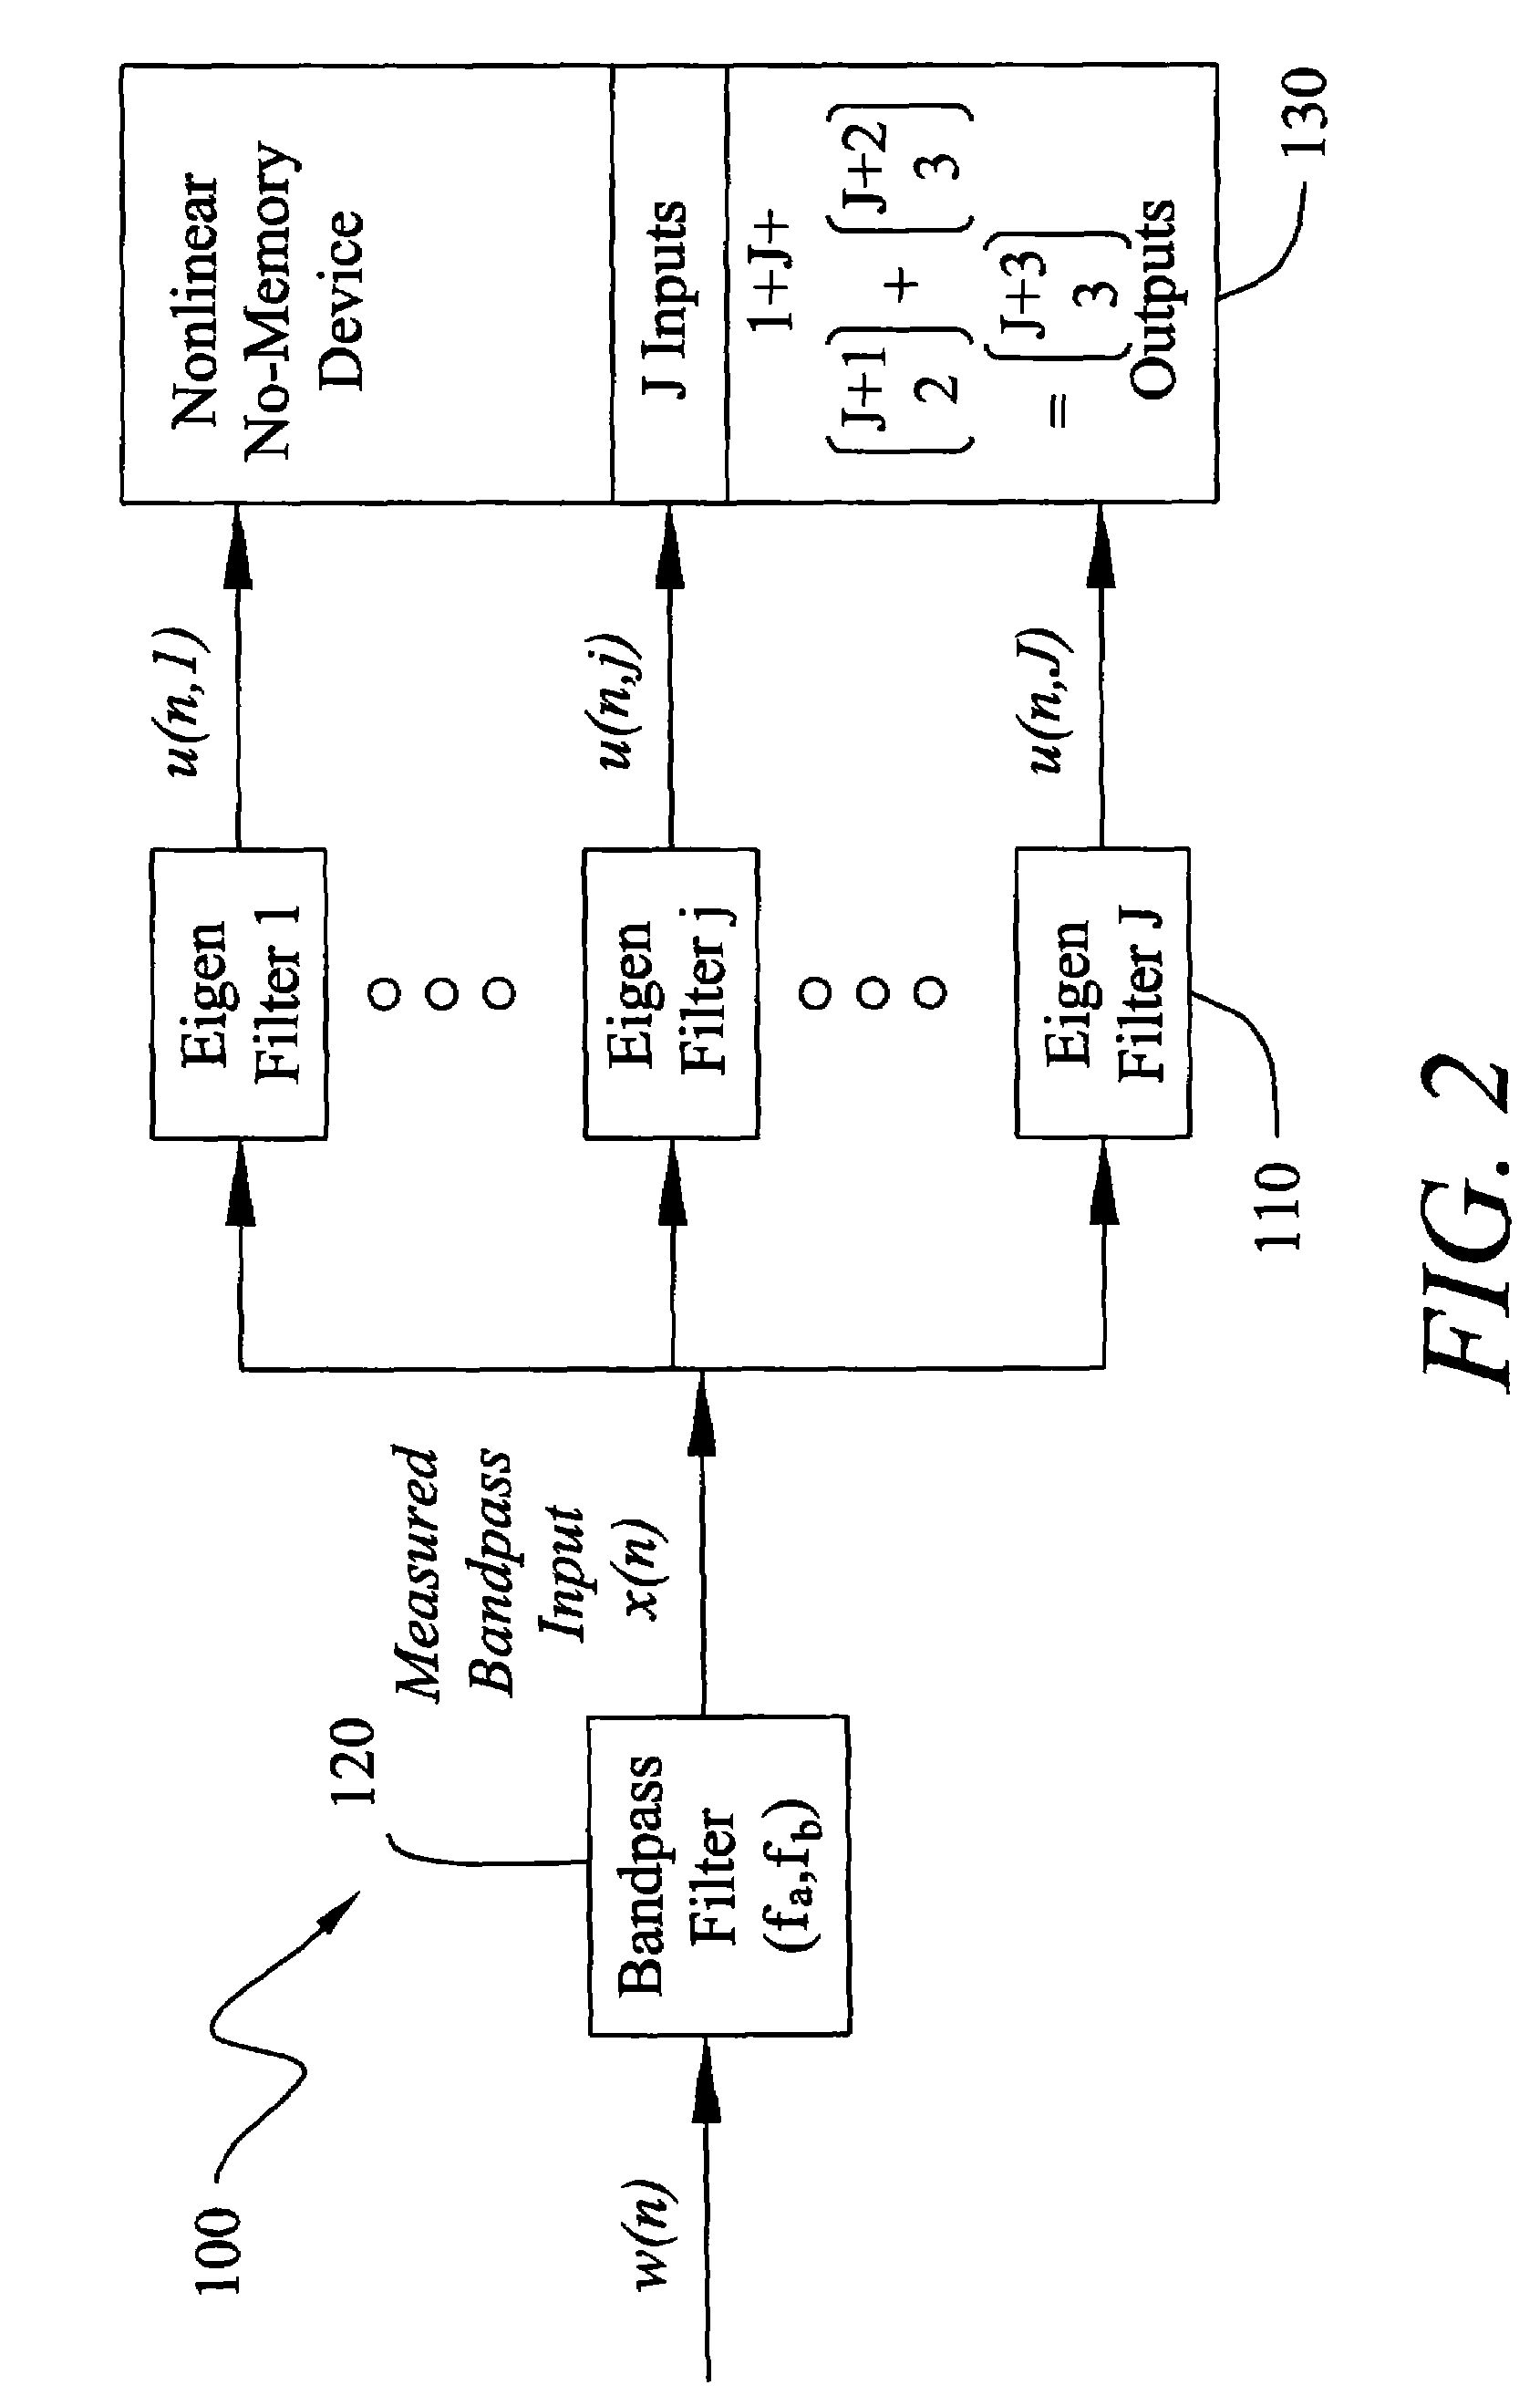 Method and apparatus for improved active sonar using singular value decomposition filtering